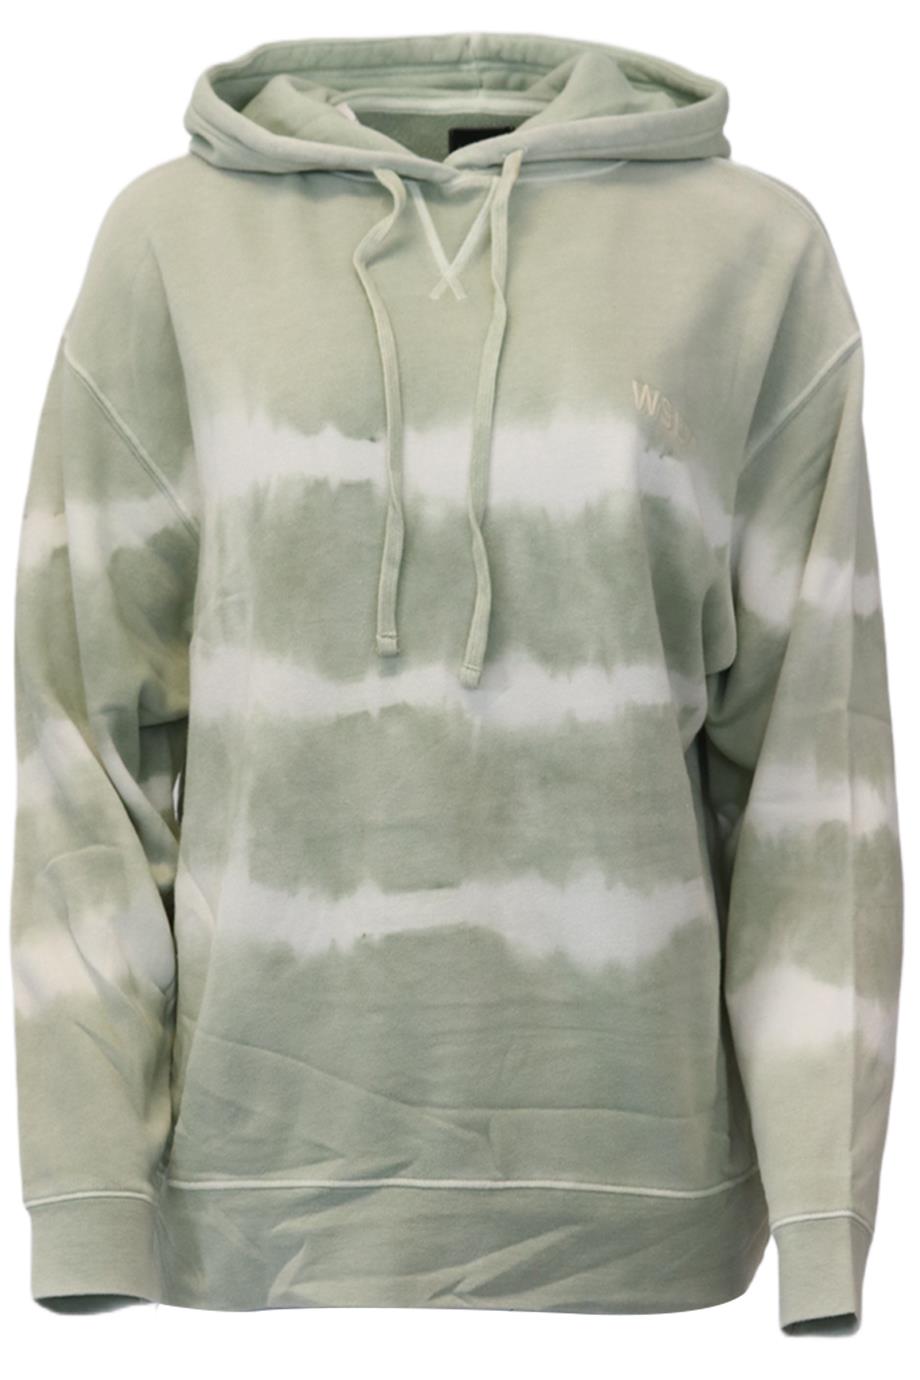 WSLY TIE DYED COTTON JERSEY HOODIE SMALL